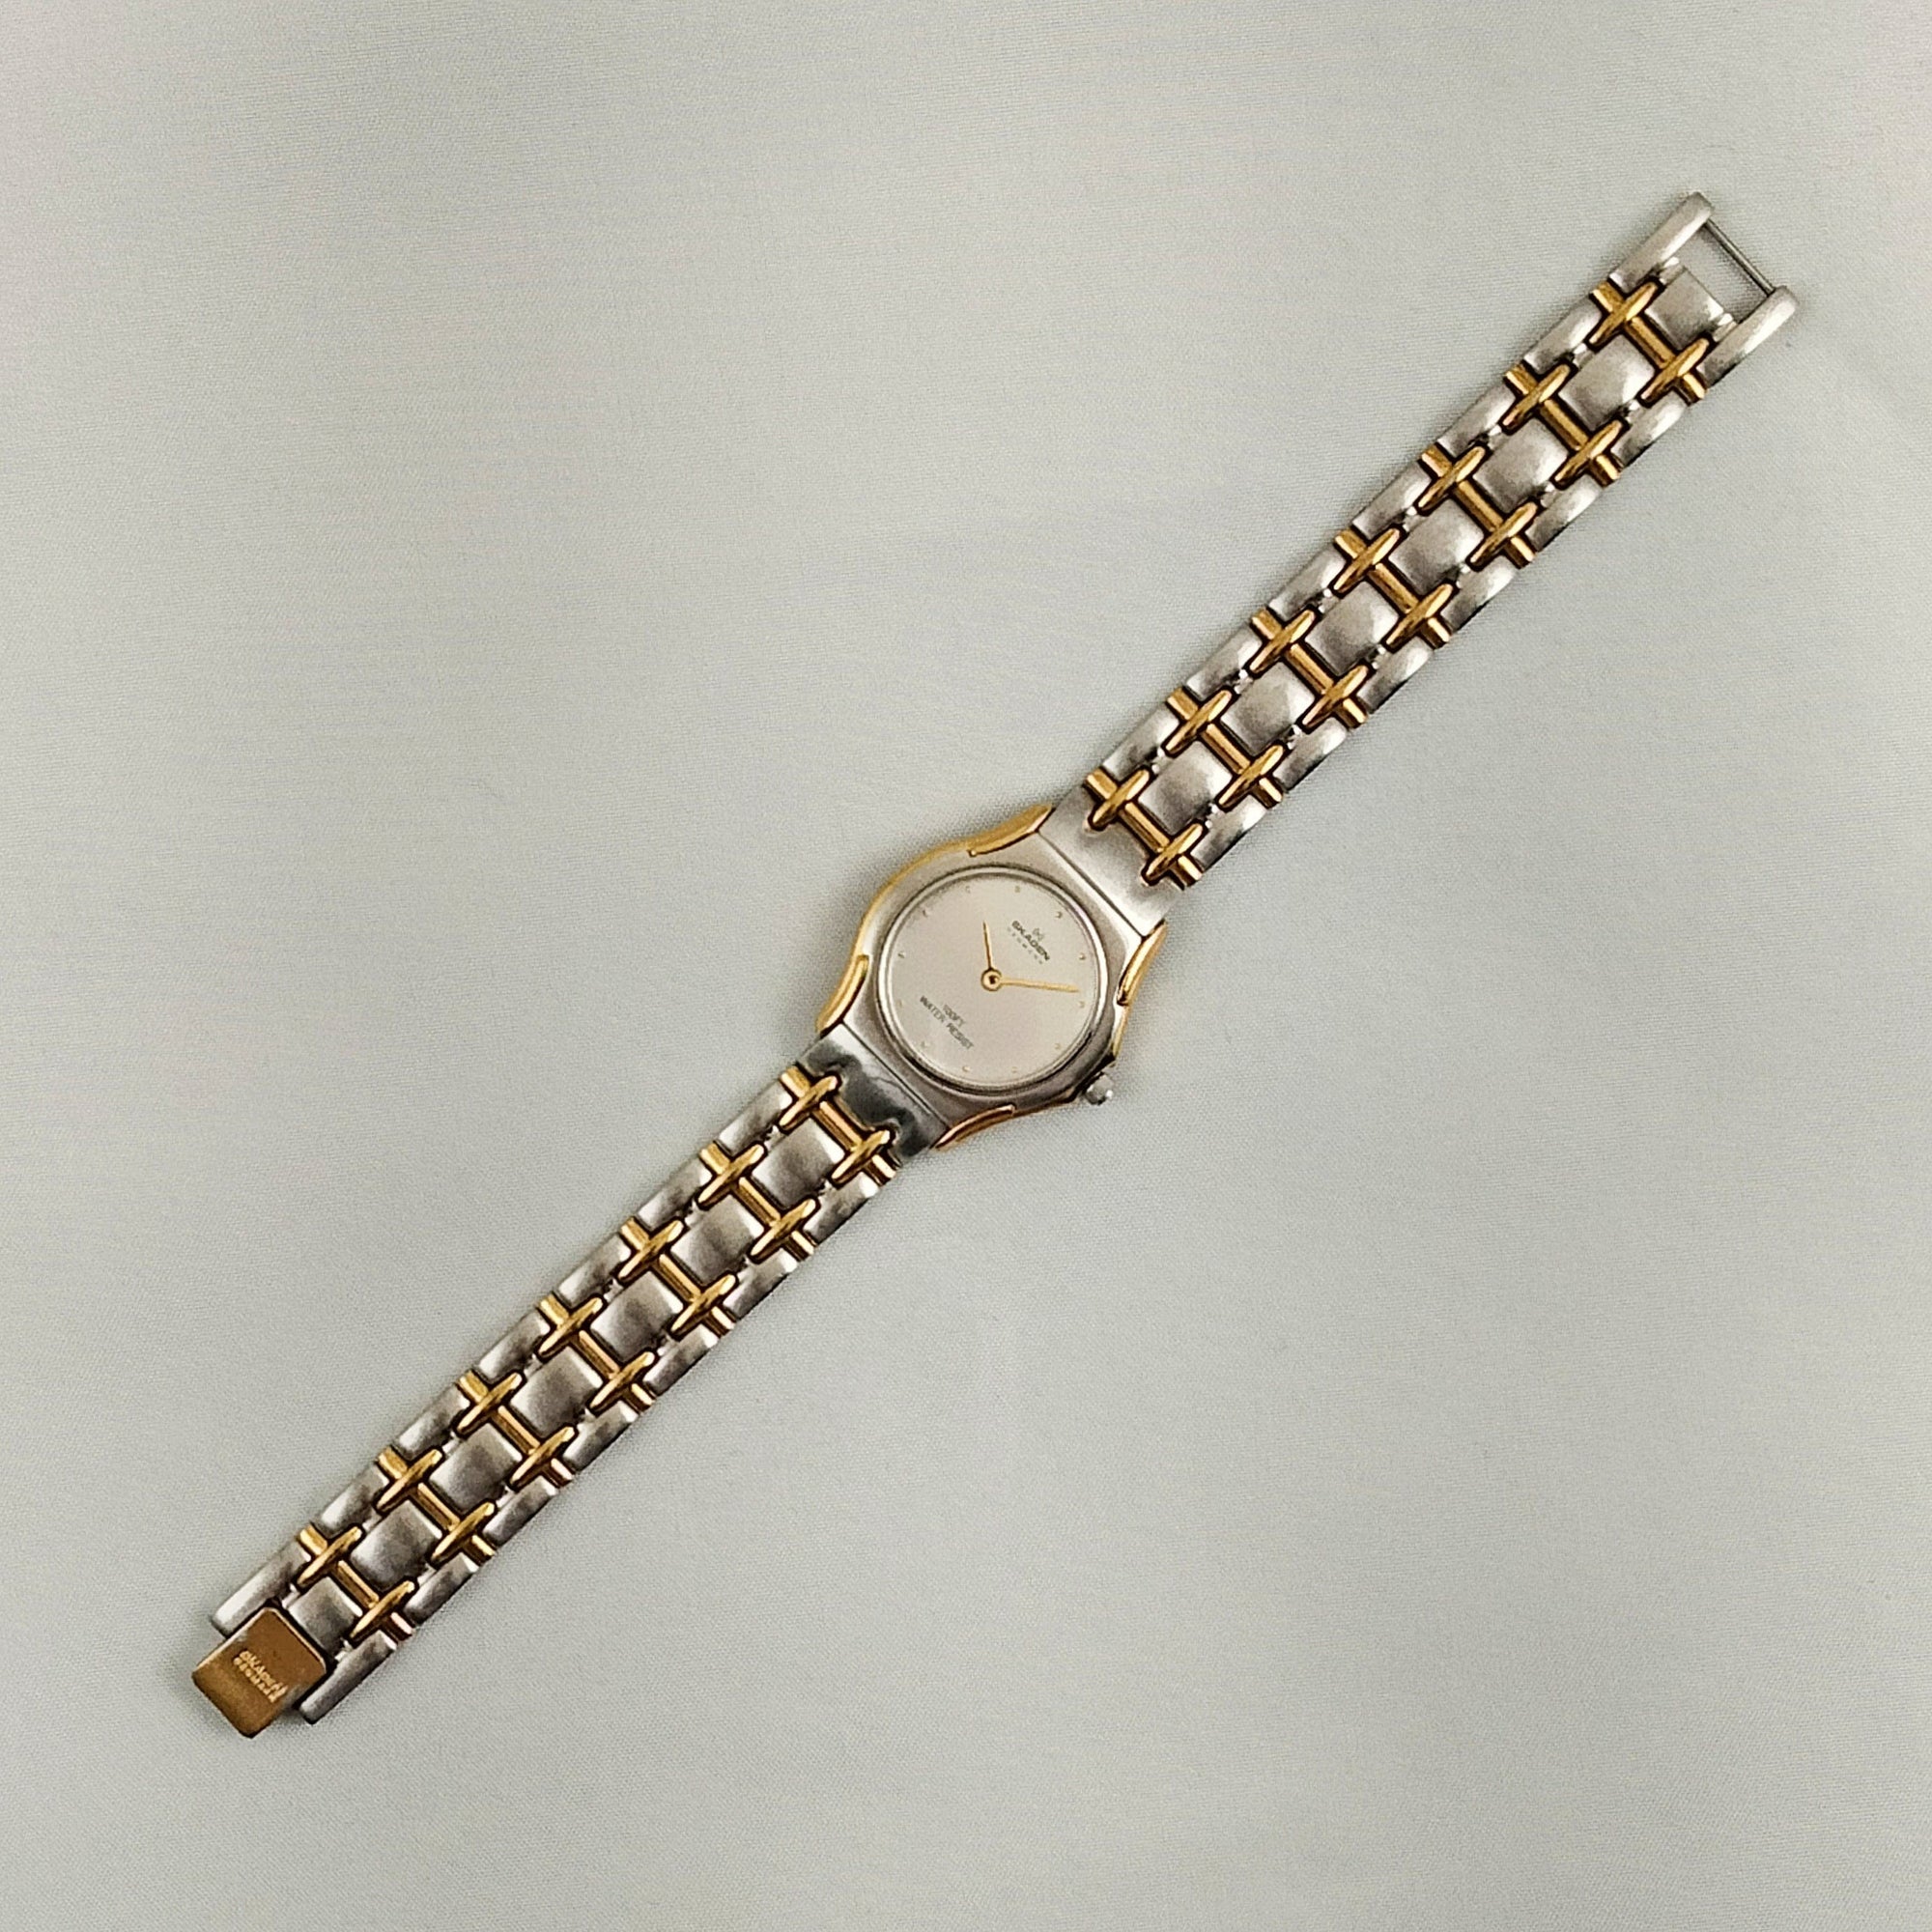 I Like Mikes Mid Century Modern Watches Skagen Women's Stainless Steel Watch, Gold Tone Details, Hour Markers, Bracelet Strap